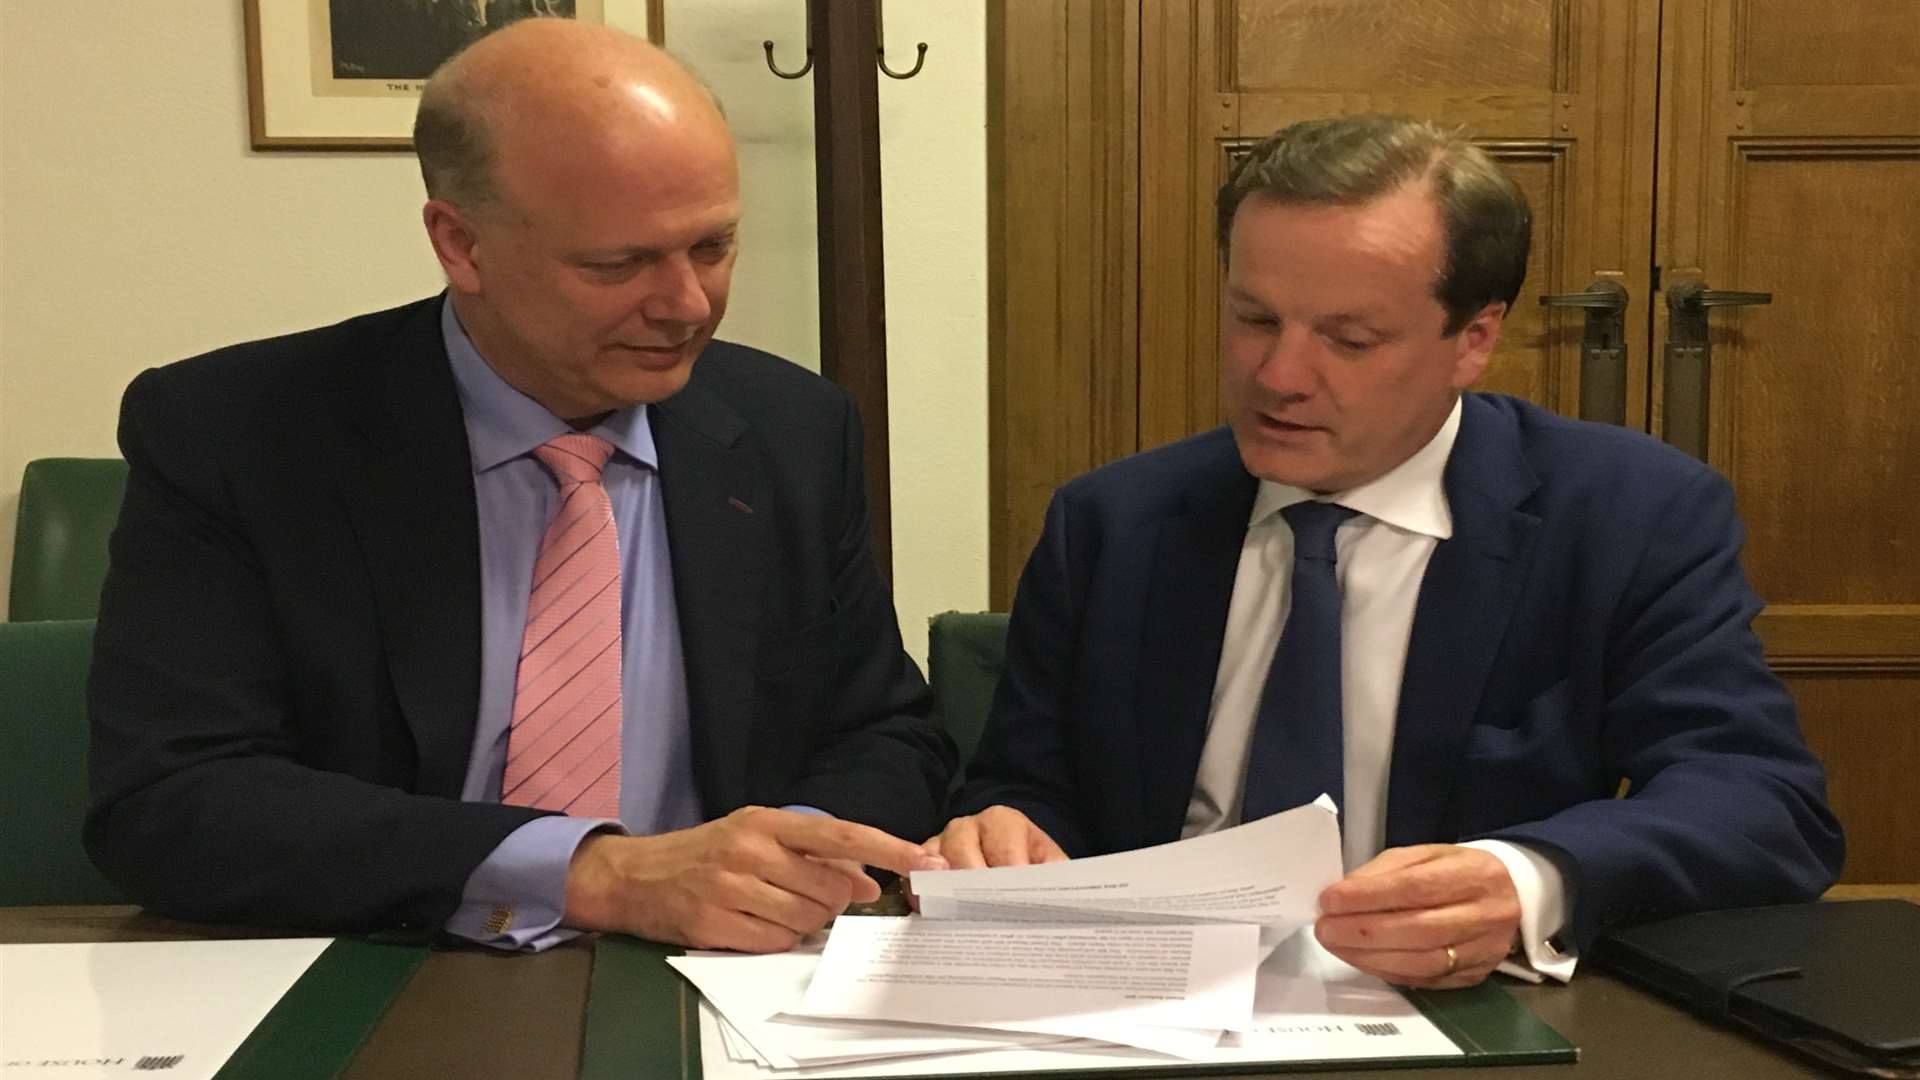 Transport Secretary Chris Grayling and Dover MP Charlie Elphicke discussing Dover TAP.